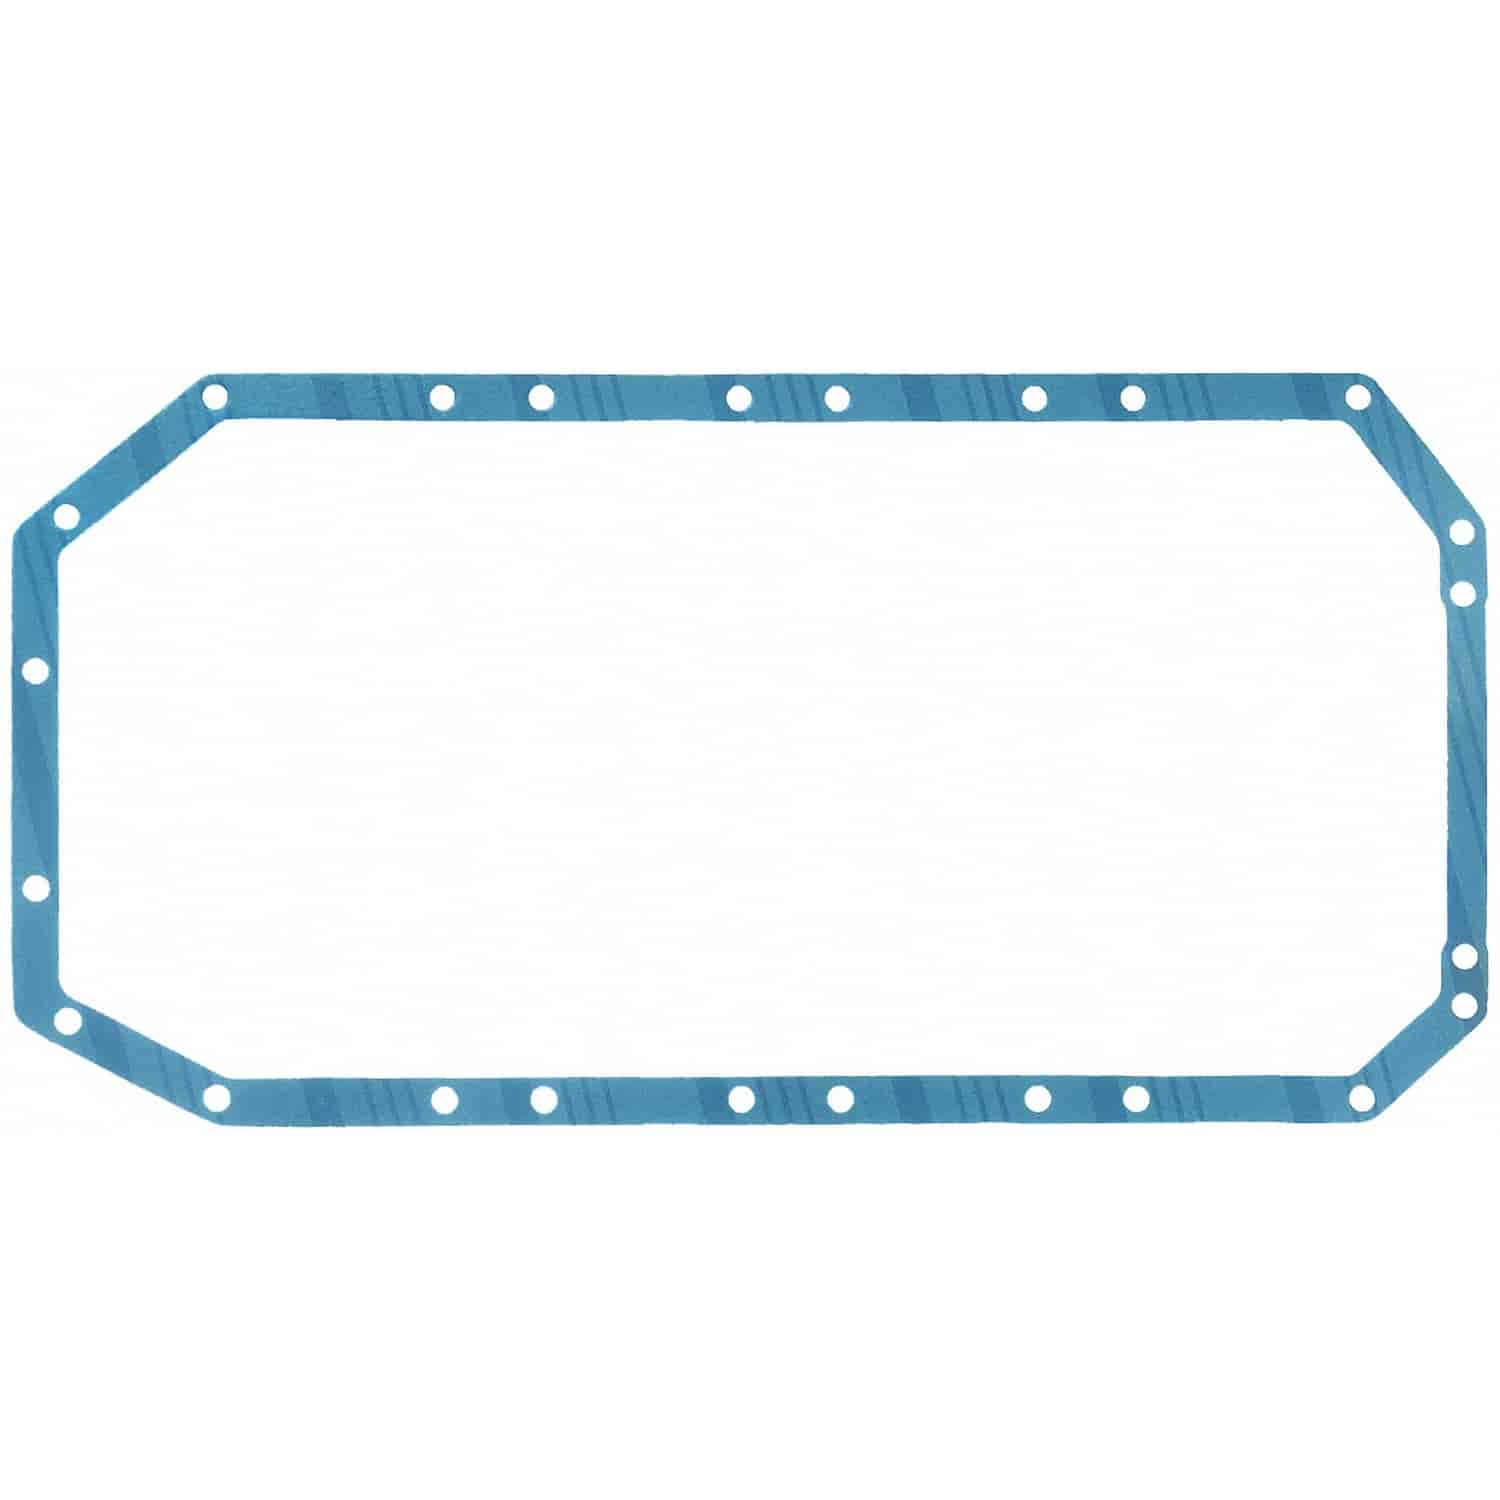 H/P Oil Pan Gasket Composite 1-Piece w/ Steel Core and Silicone Coating